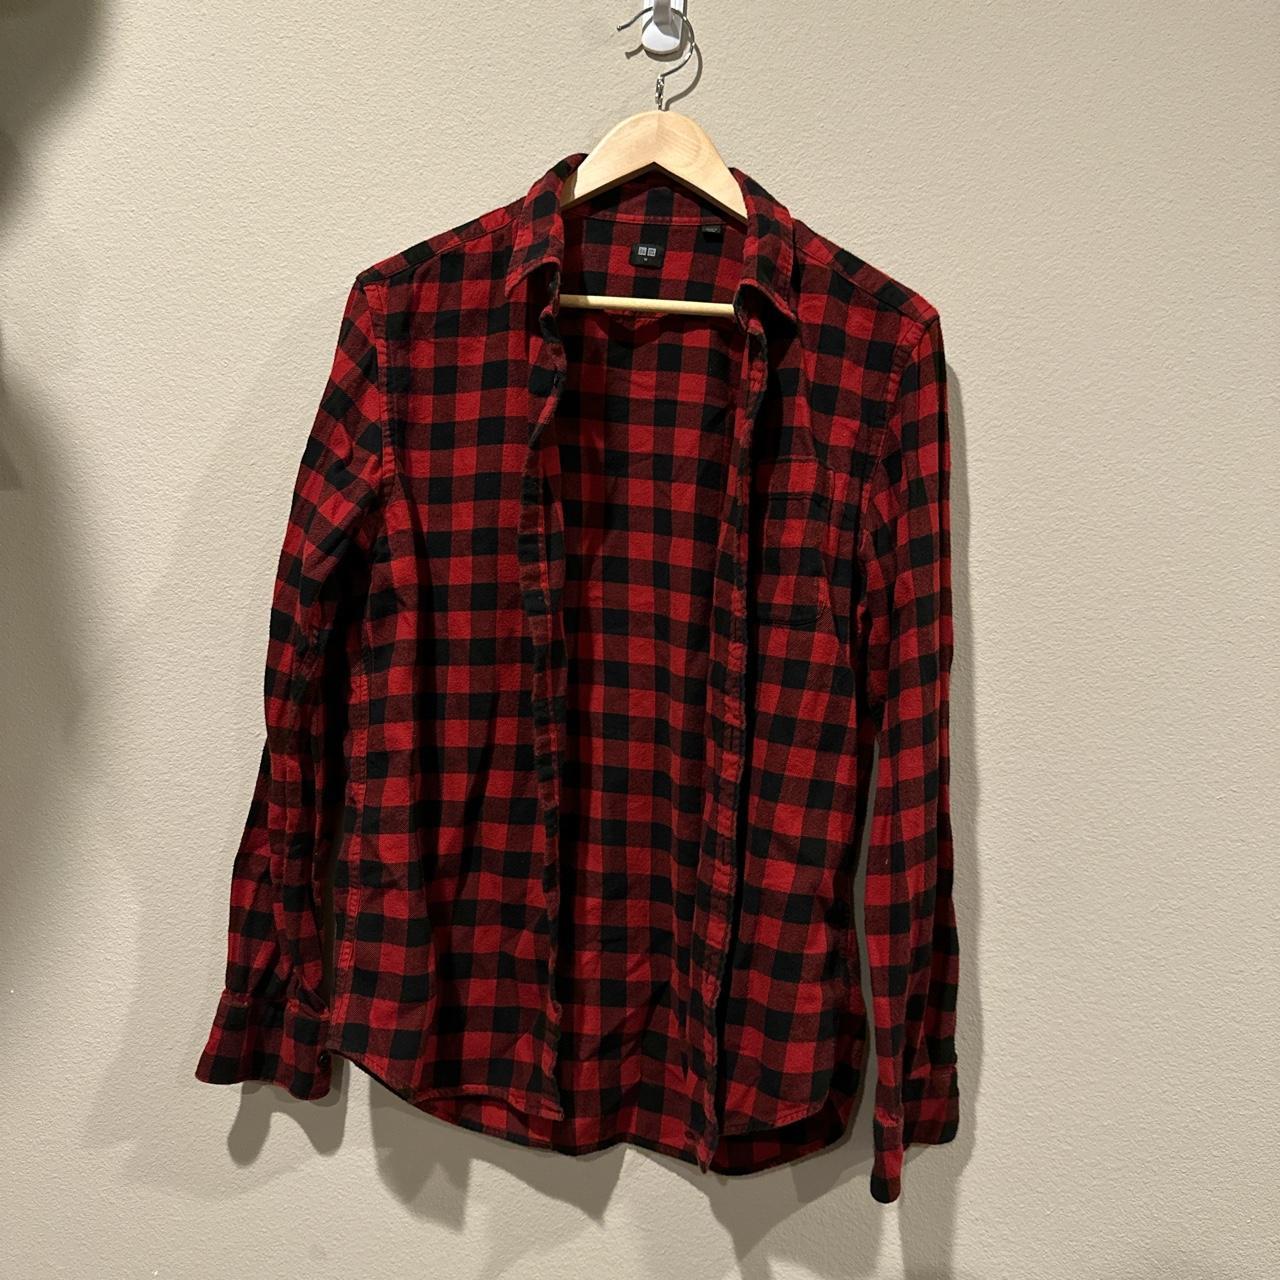 UNIQLO Men's Red and Black Shirt